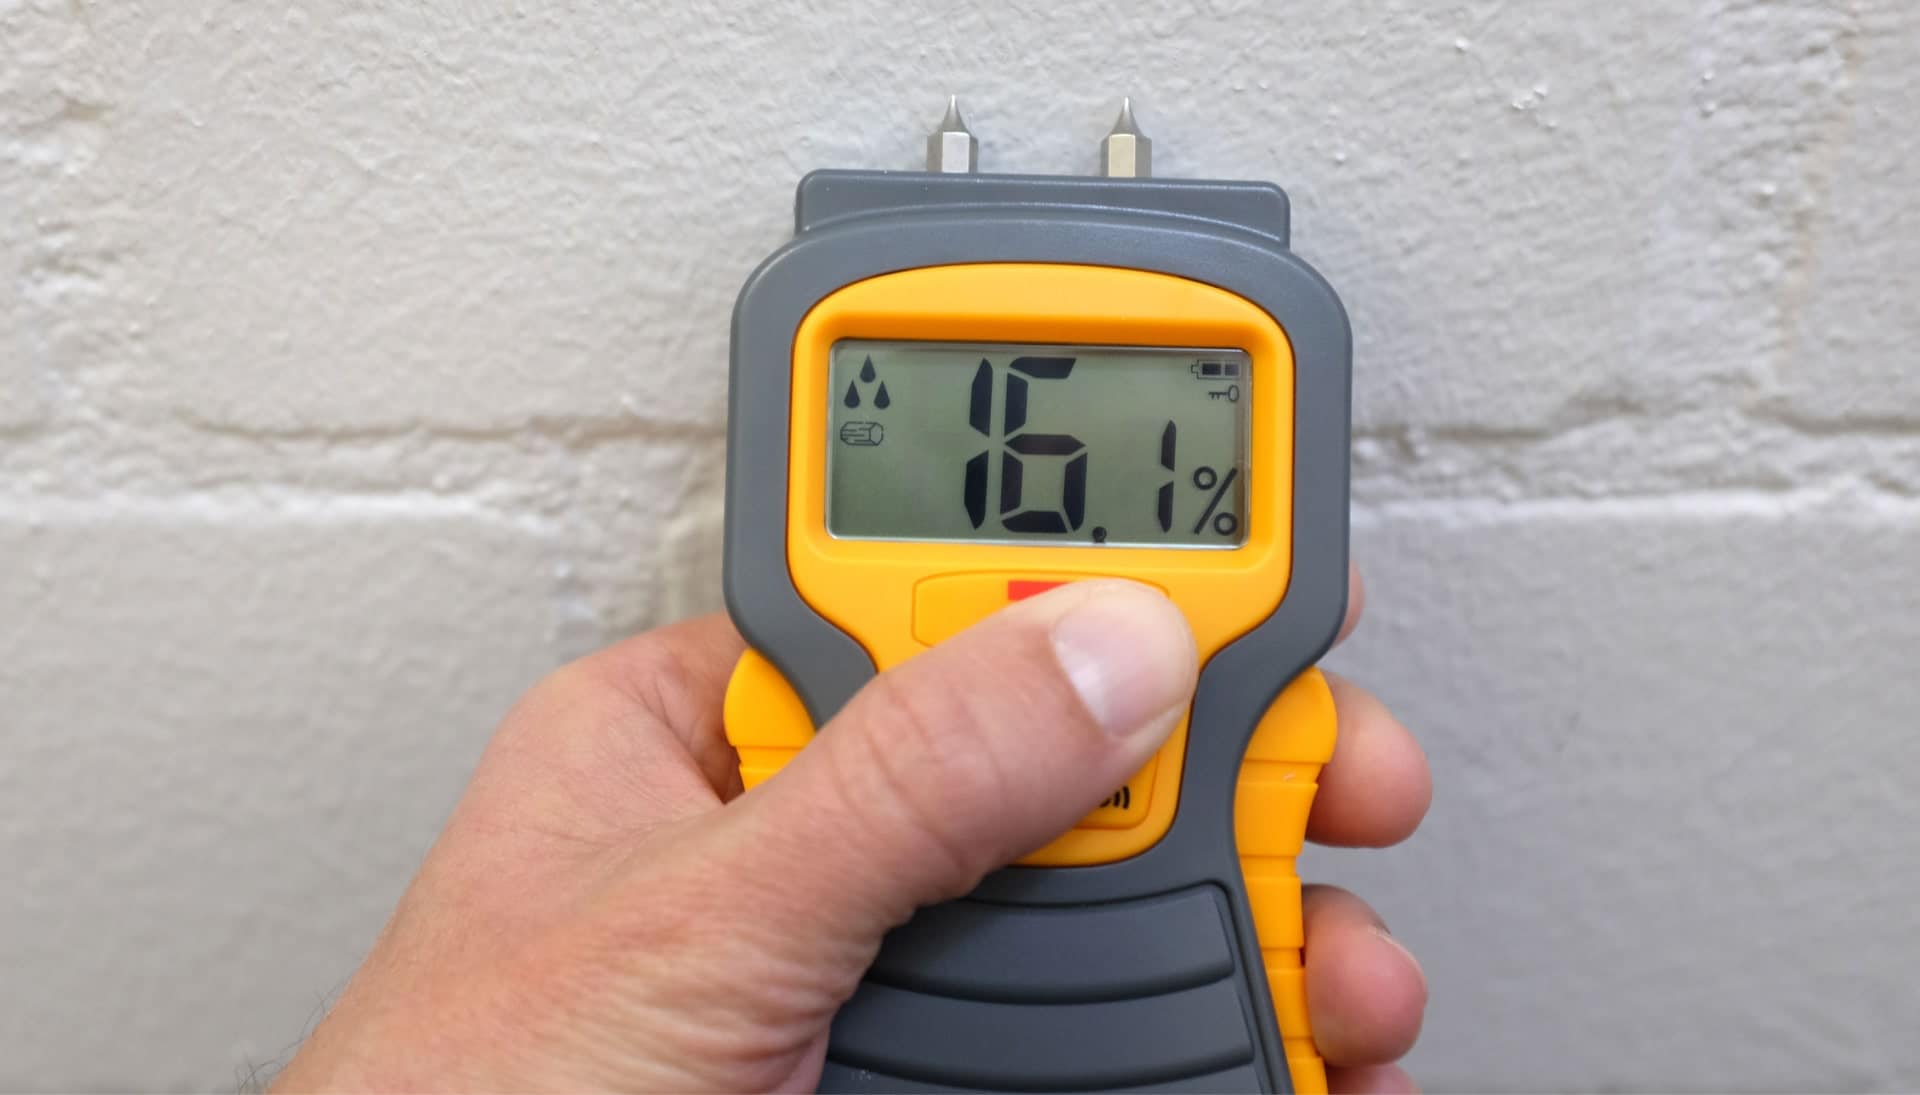 We provide fast, accurate, and affordable mold testing services in Lexington, SC.